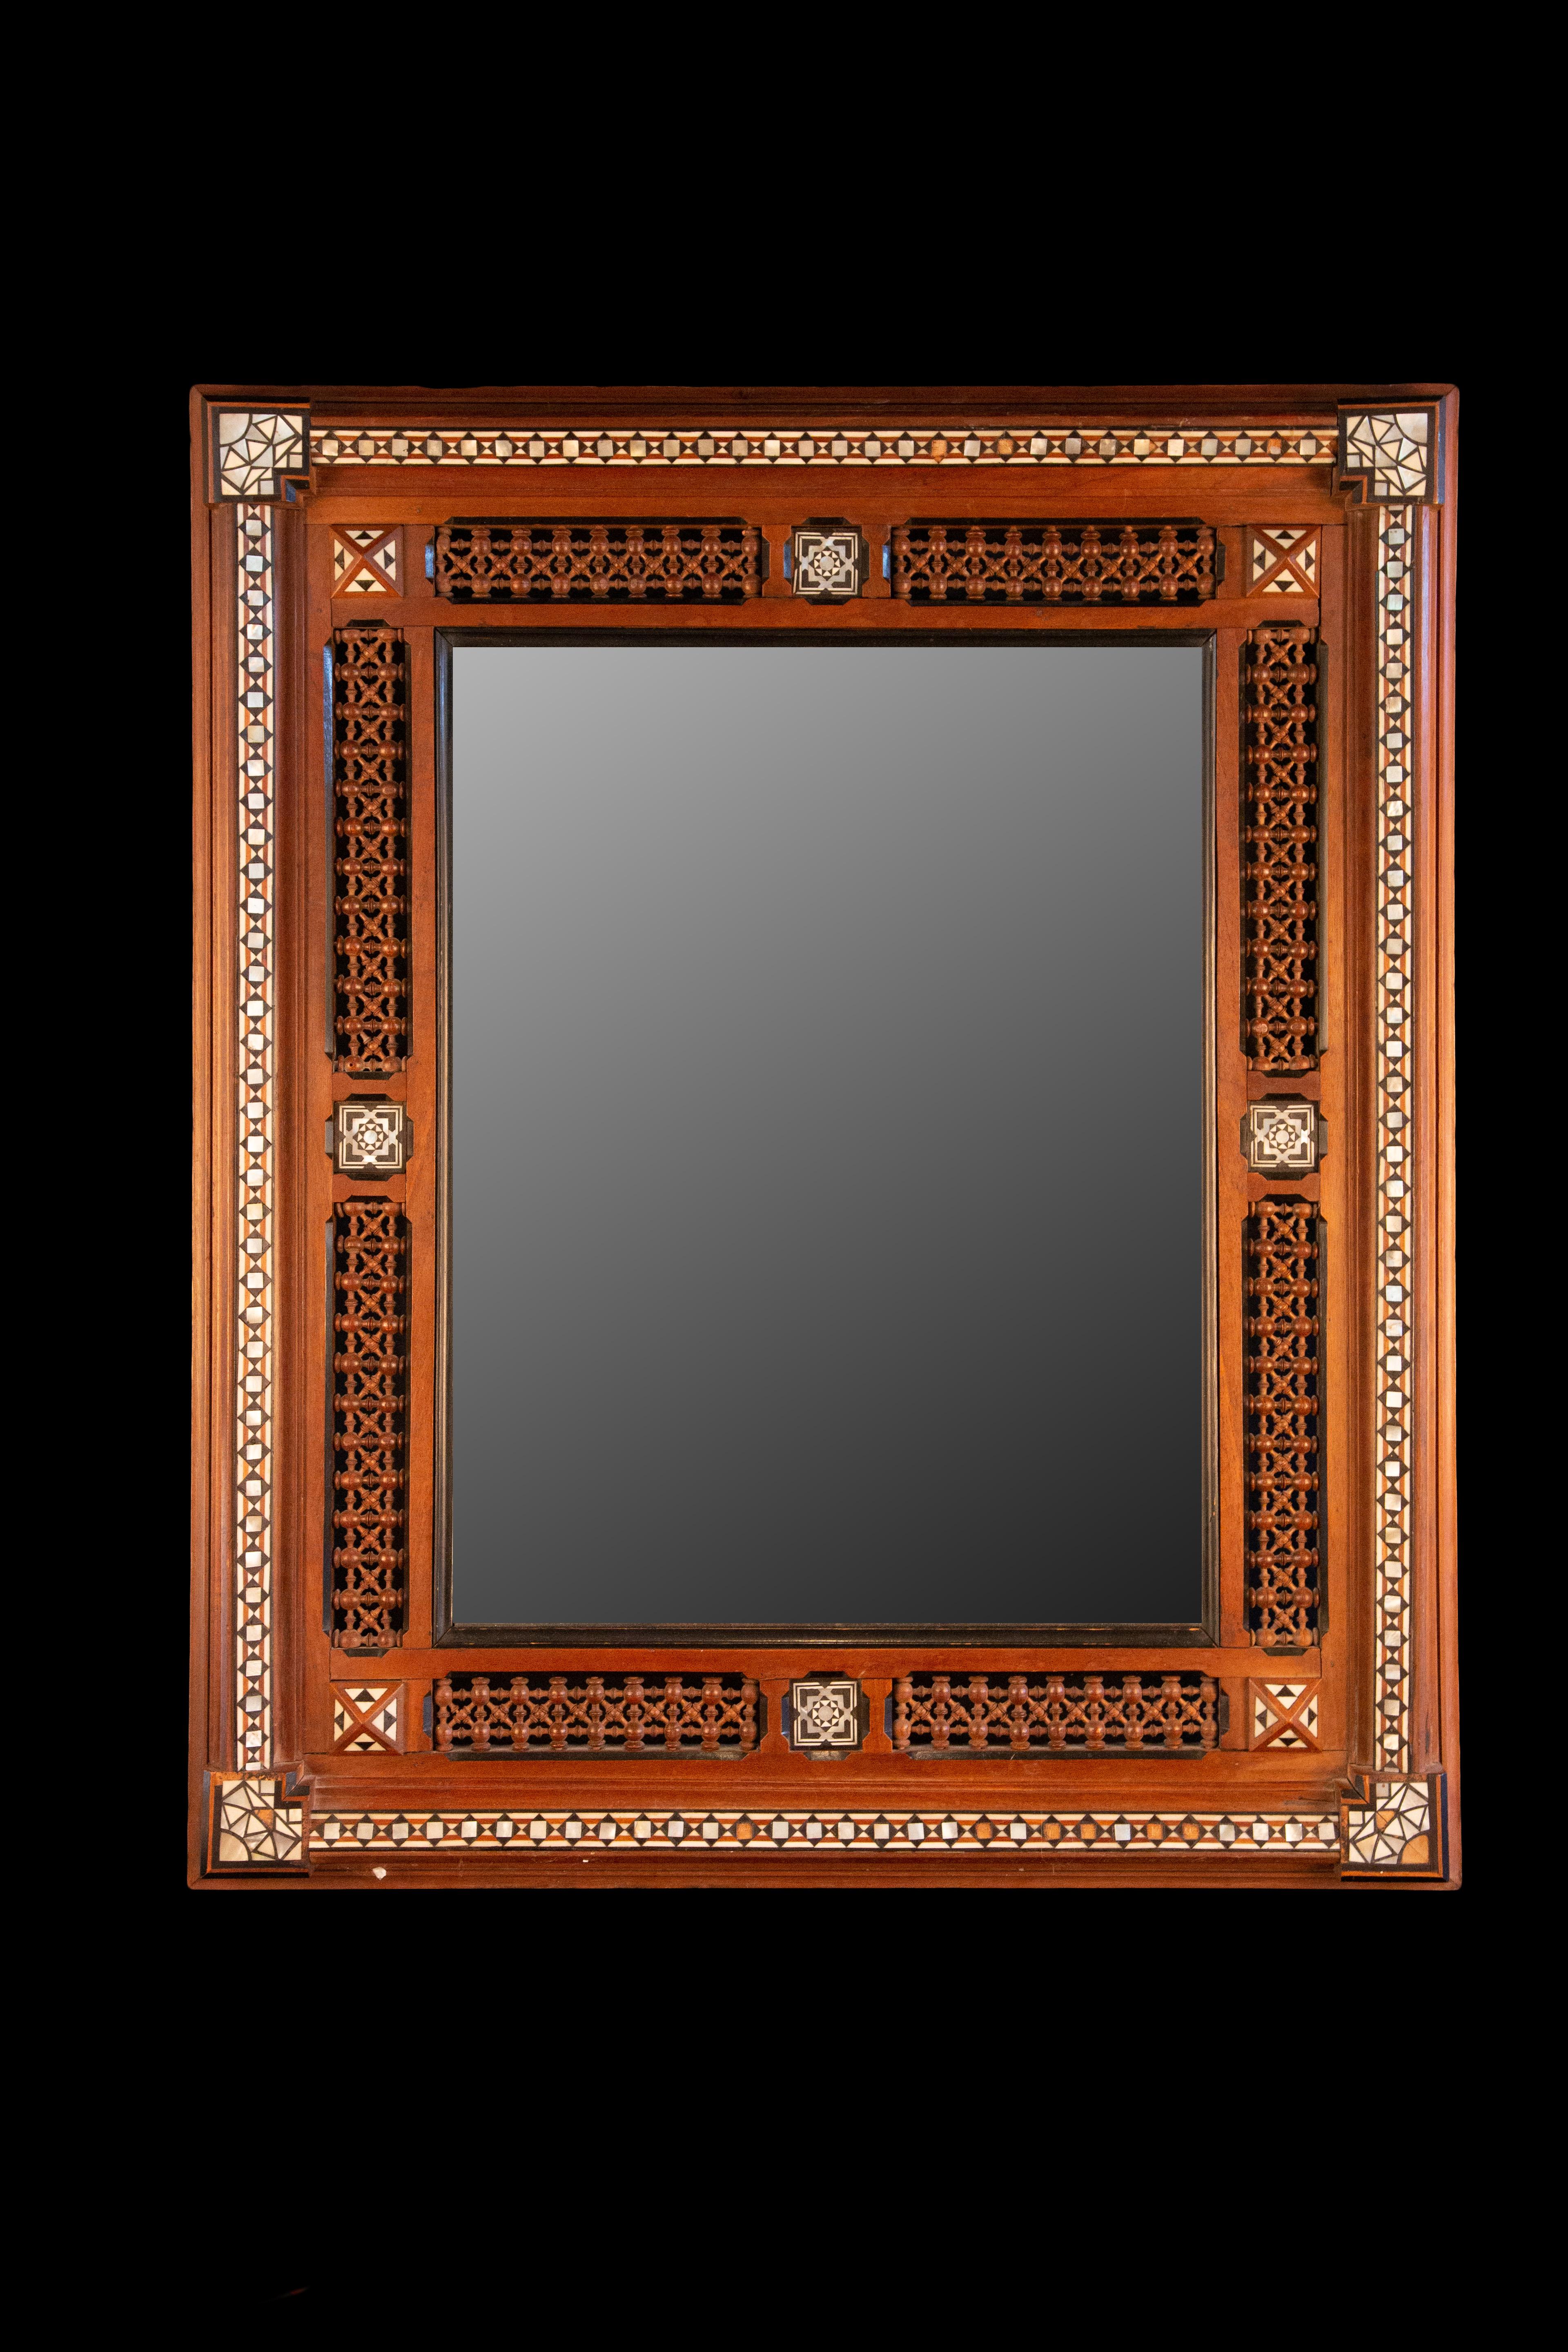 Early 20th Century Damascus inlaid bone and wood wall mirror:

Measures: 25